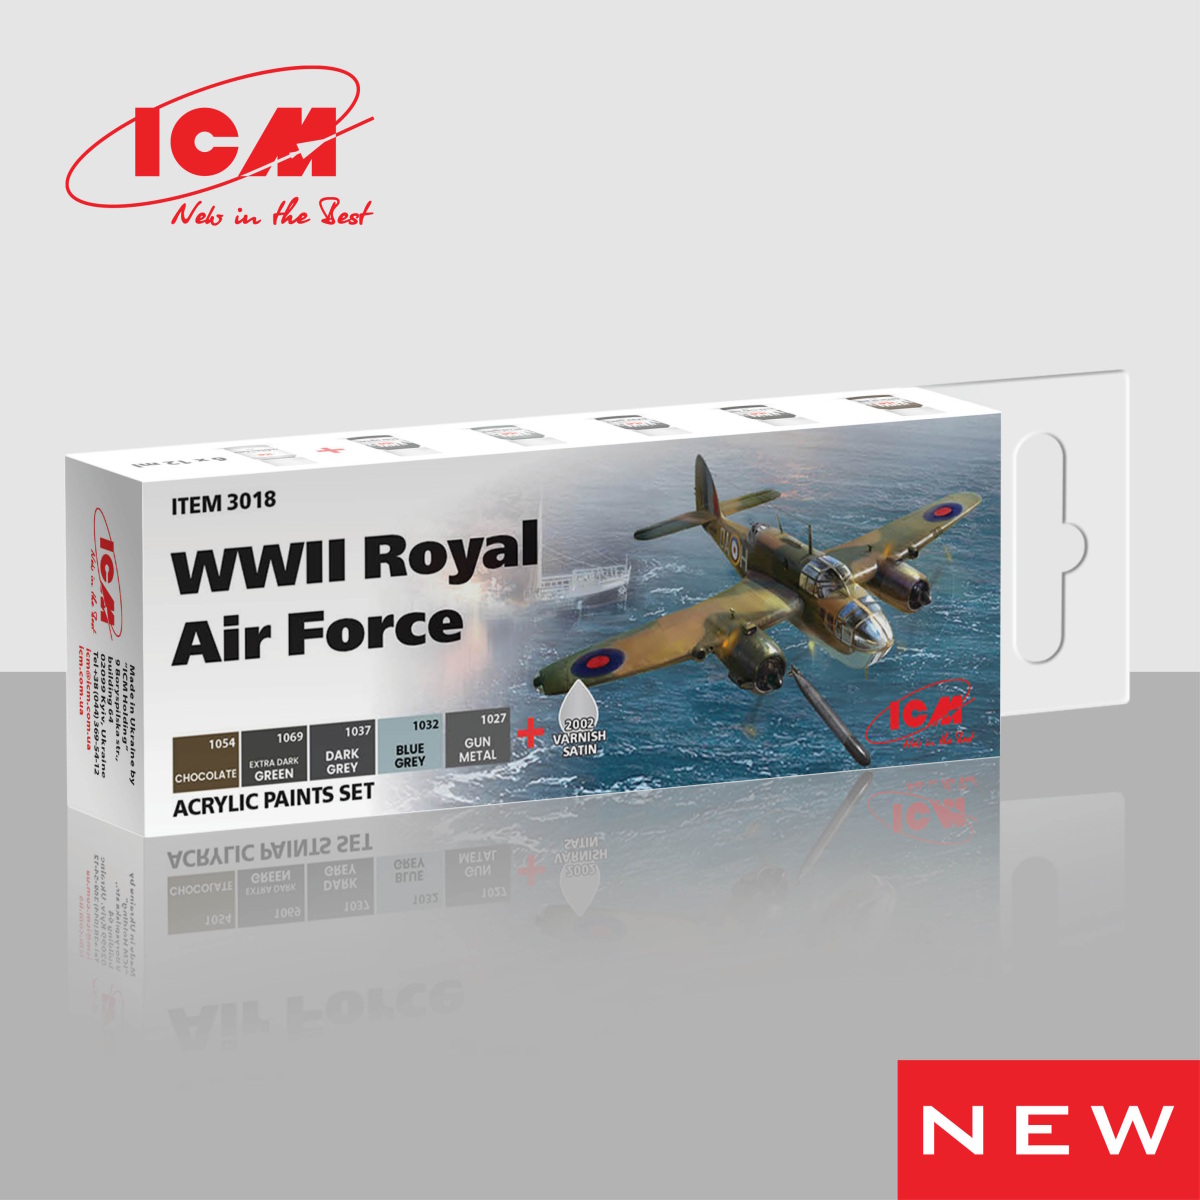 Acrylic Paint set for WWII Royal Air Force